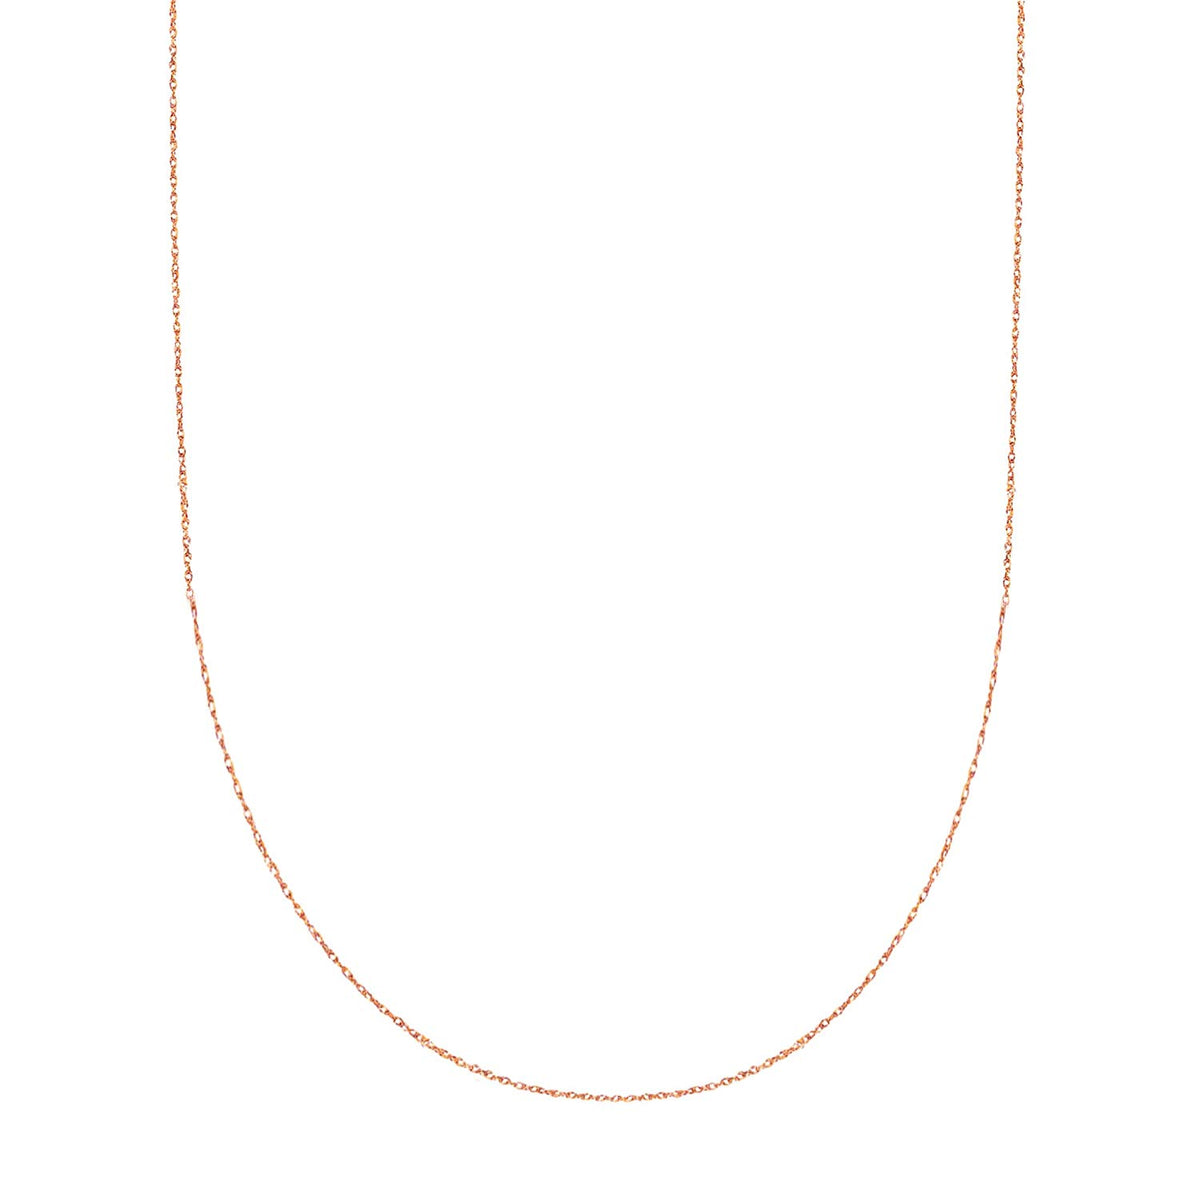 14k Rose Gold Rope Chain Necklace, 0.8mm, 18" fine designer jewelry for men and women